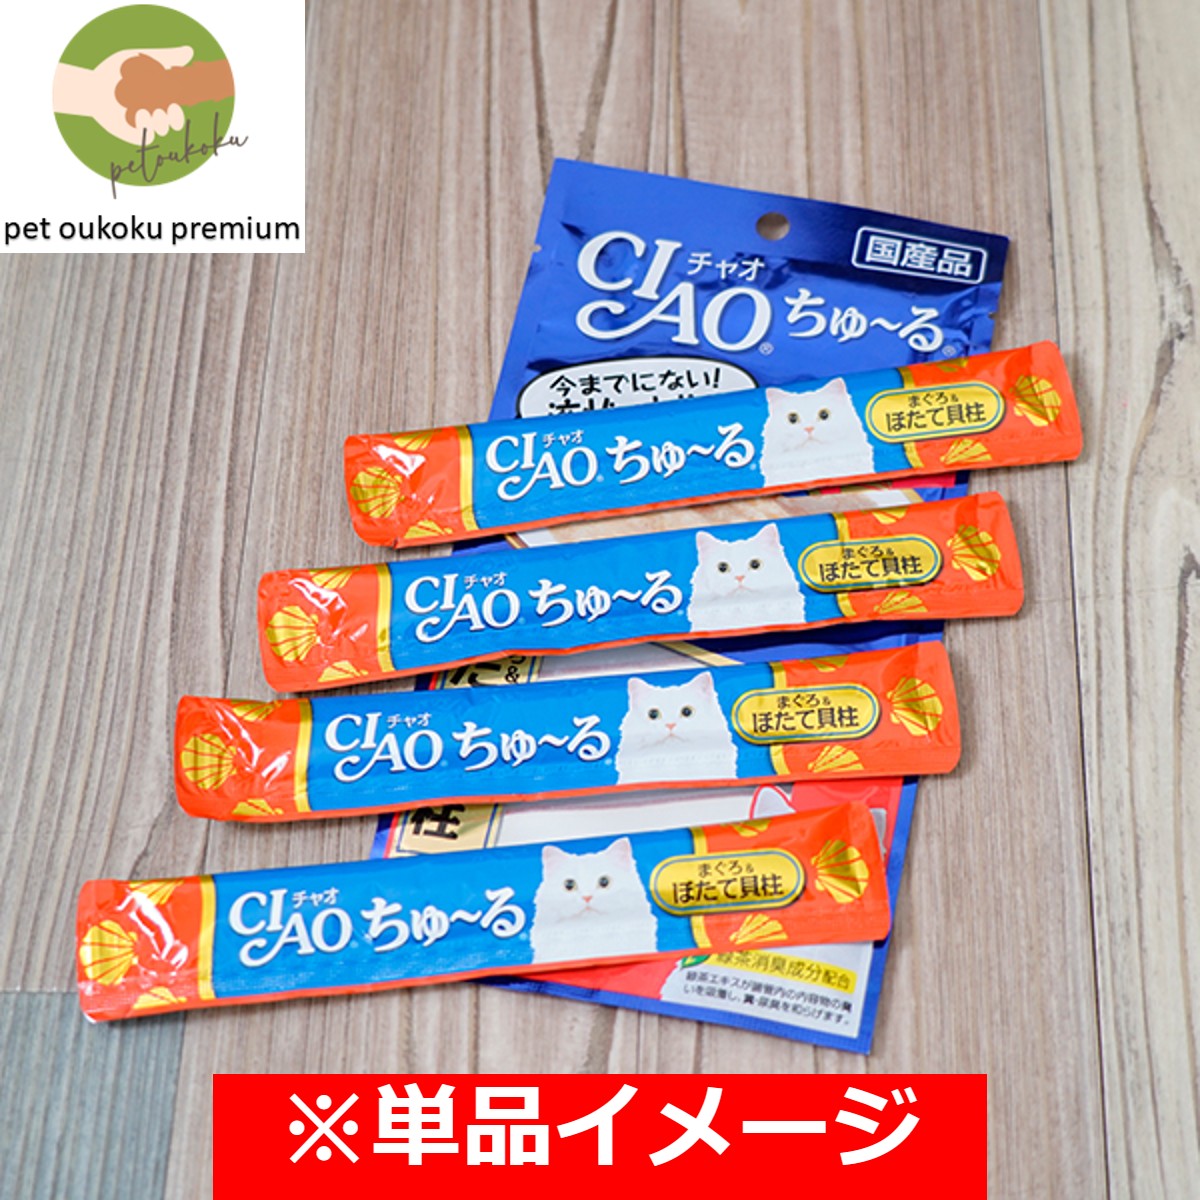 CIAO..~.120 pcs insertion ...~. gourmet ... seafood variety ... Ciao chu-ru..~.120ps.